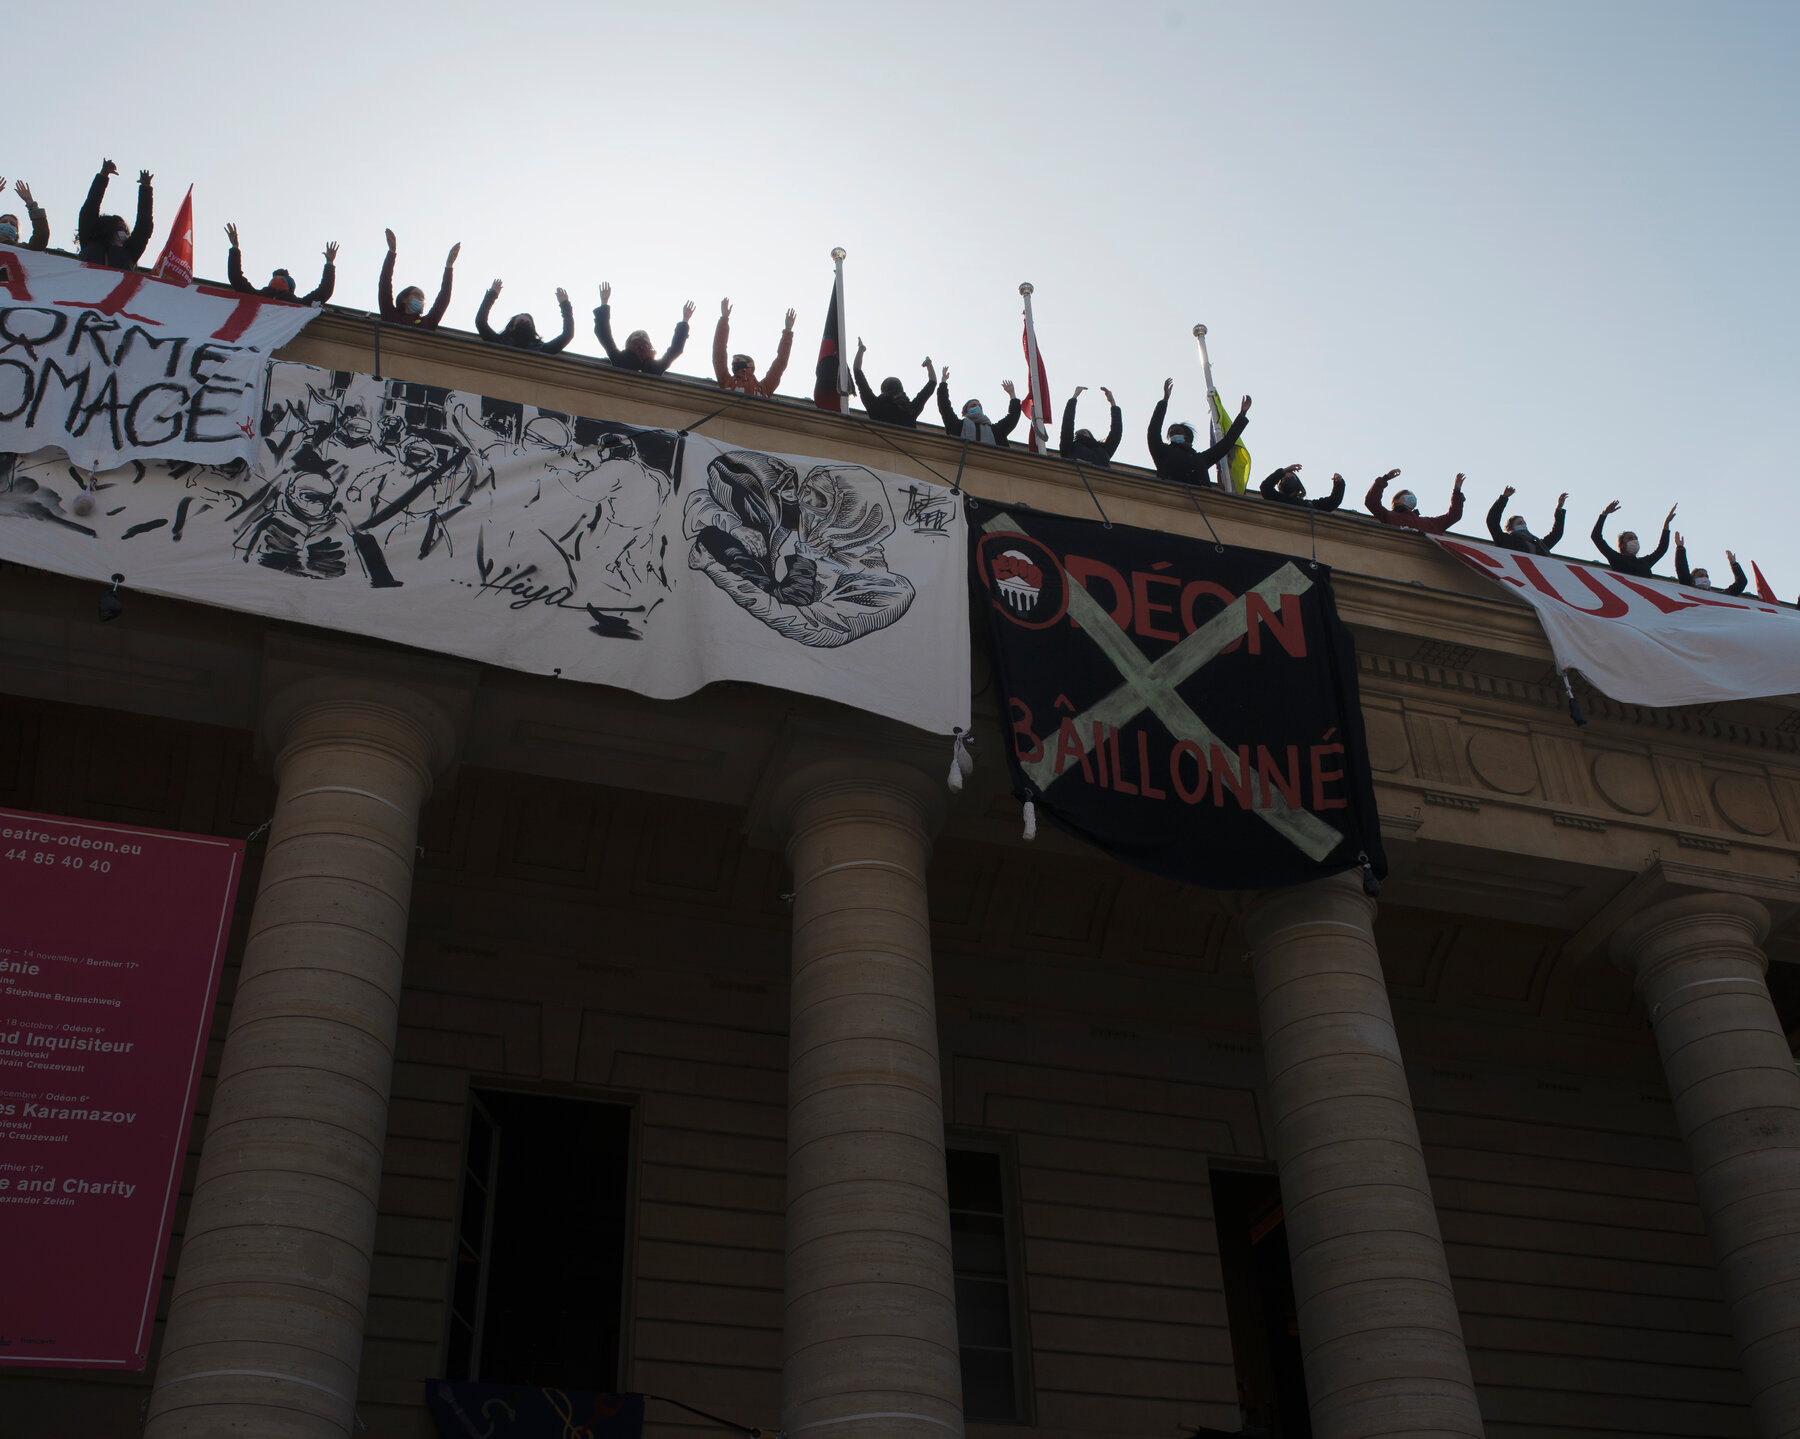 Arts workers-occupiers with banners on the roof of L’Odeon, Paris, March 2021. Photo by Elliott Verdier @elliott.verdier for The New York Times